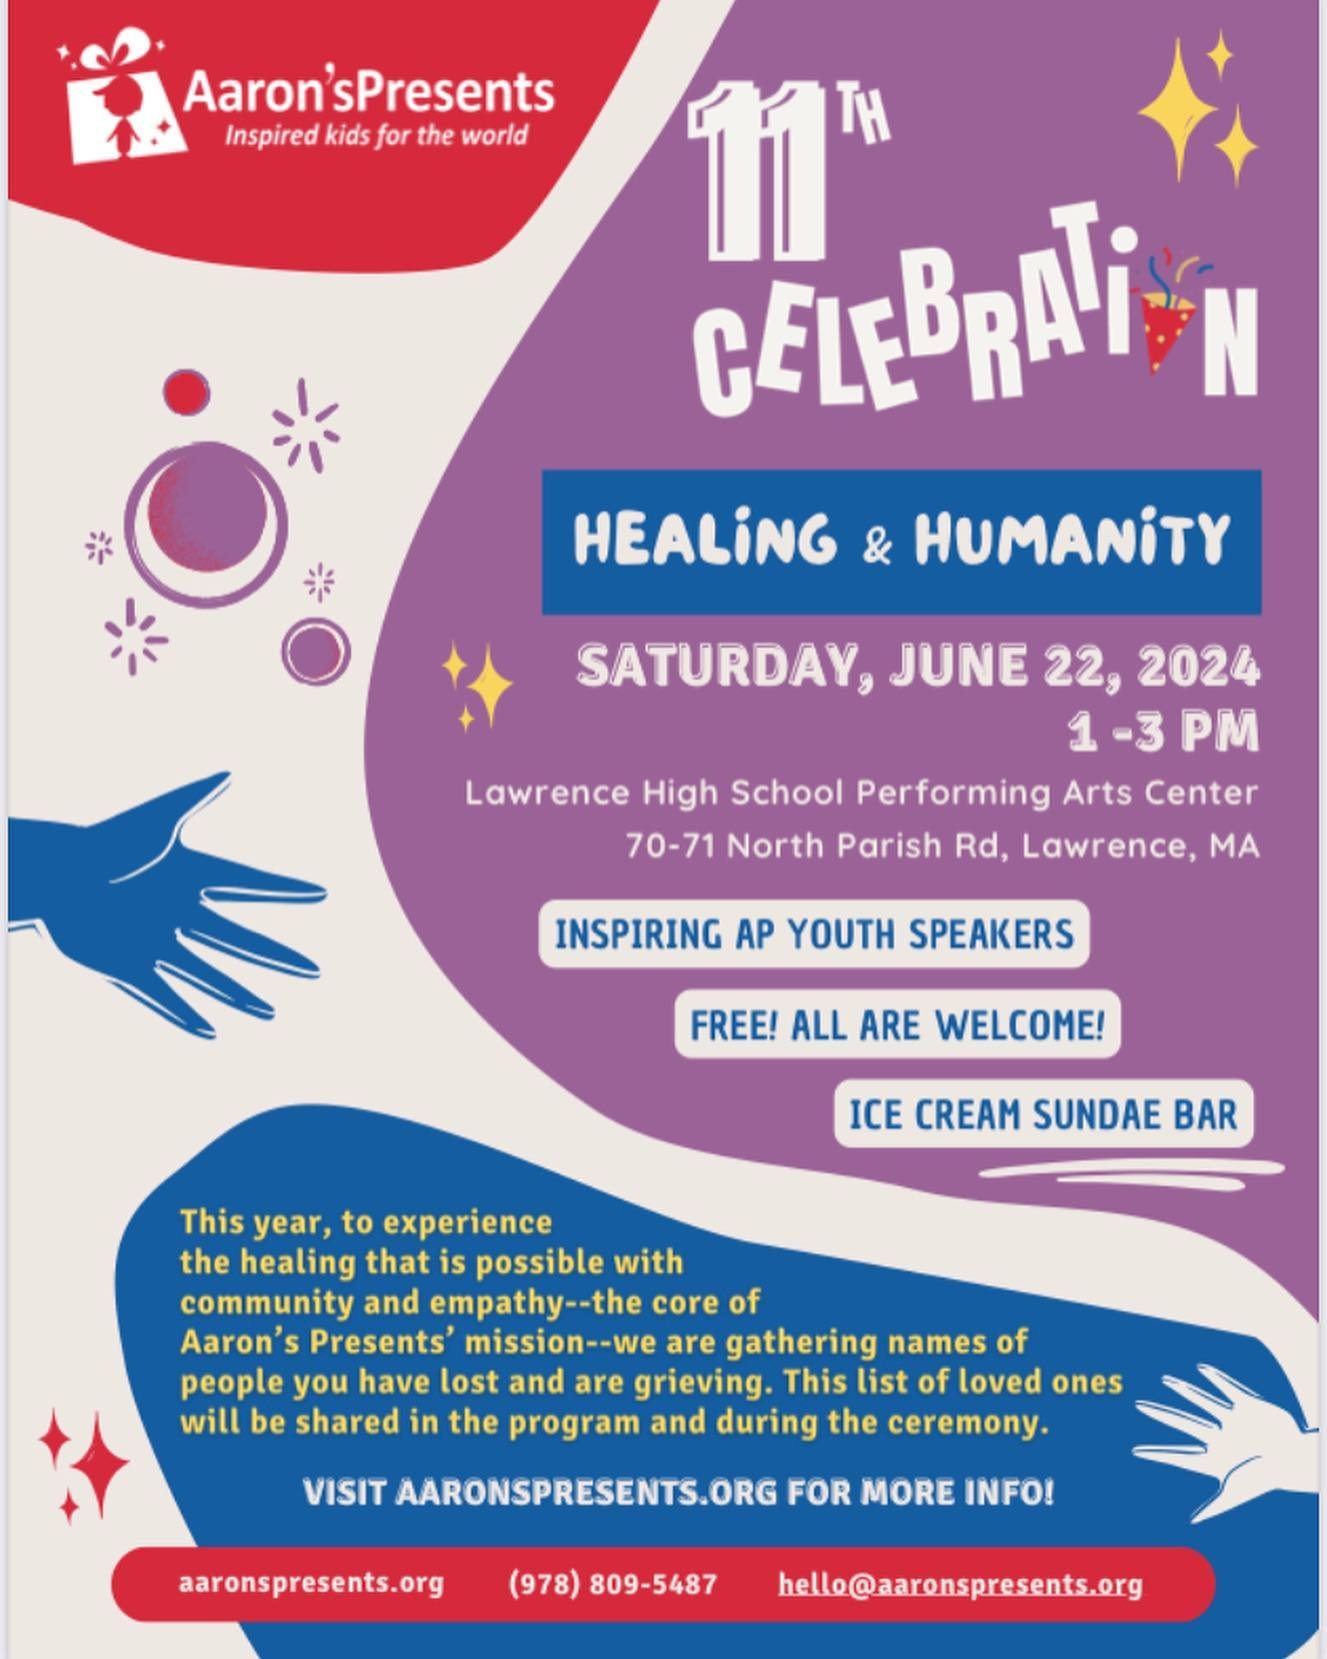 Our 11th Annual Celebration is Saturday June 22, 1-3 at Lawrence High&rsquo;s beautiful theatre!! AP kids, teens, 20-something&rsquo;s, let us know if you want to speak, volunteer to help with setup, cleanup, giving out merch, etc. that day. There wi